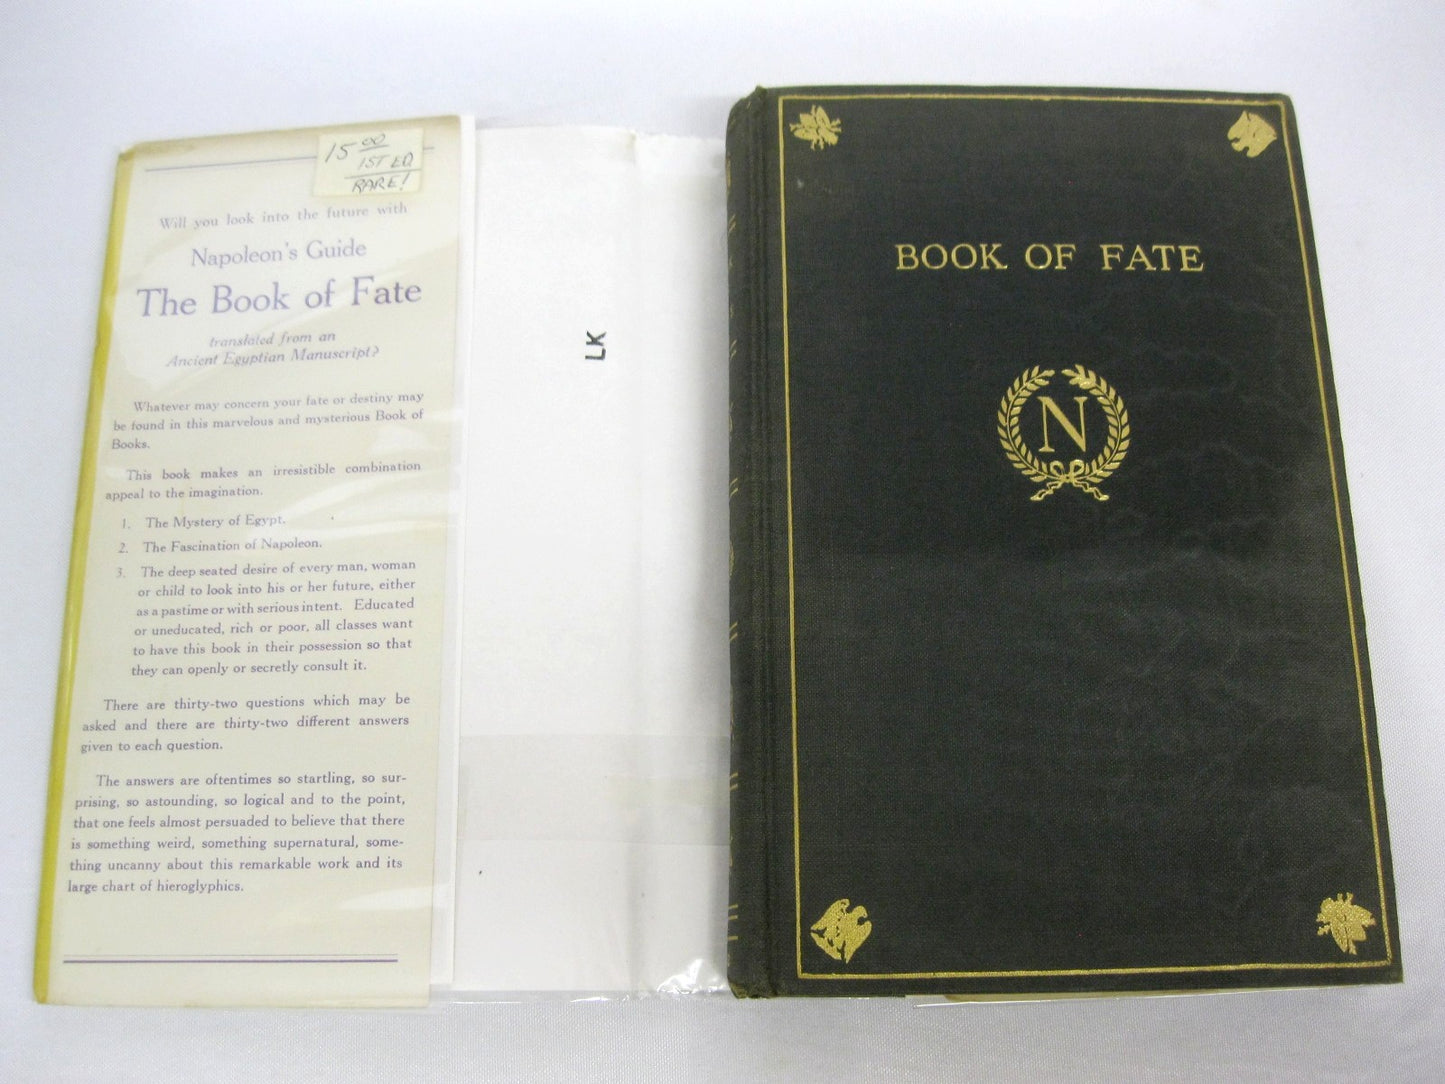 Book of Fate Napoleon's Guide to Destiny translated by H. Kirchenhoffer